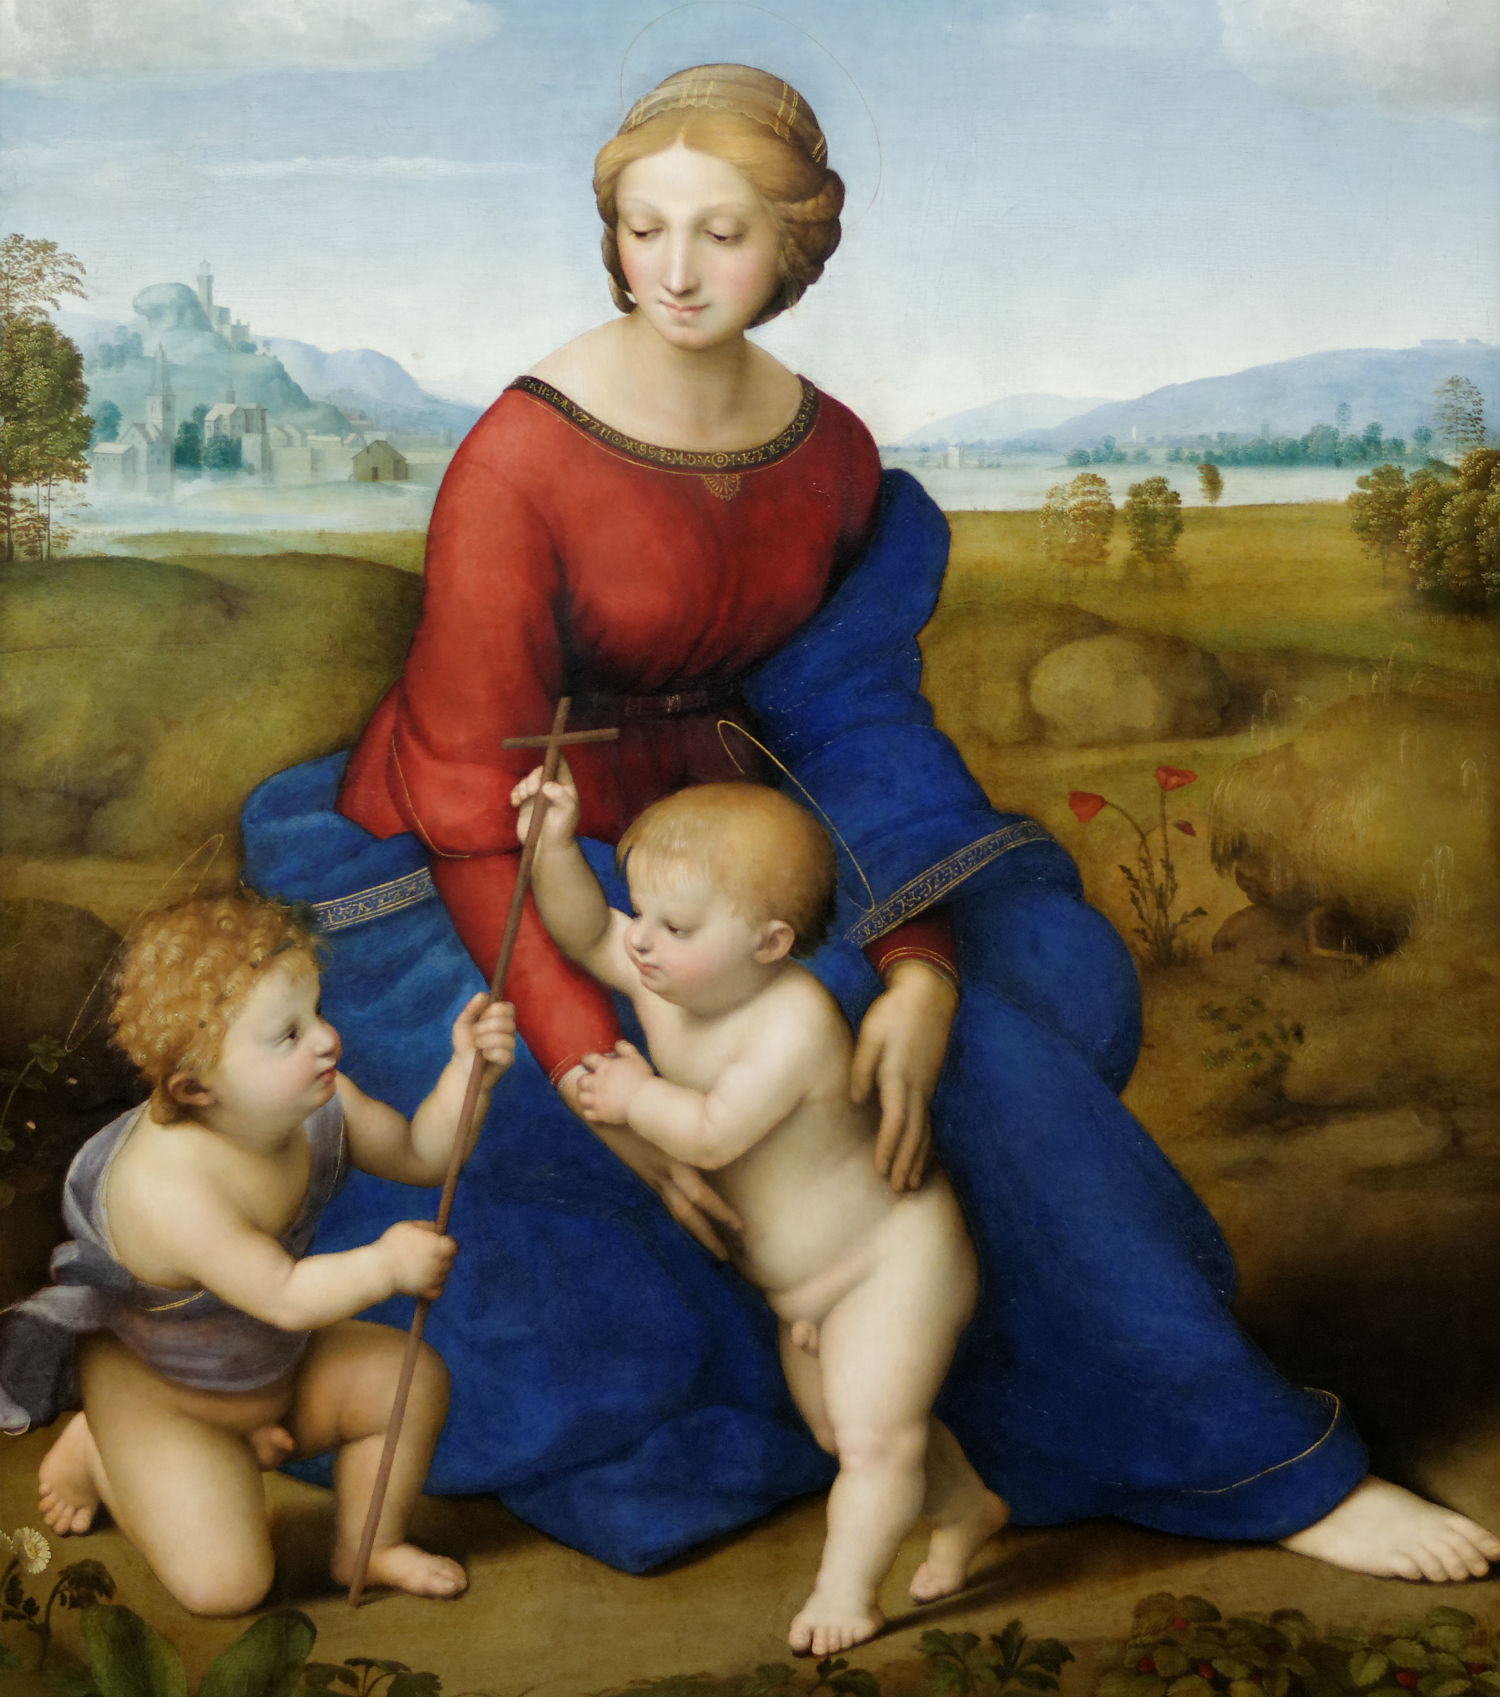 raphael madonna in the meadows painting